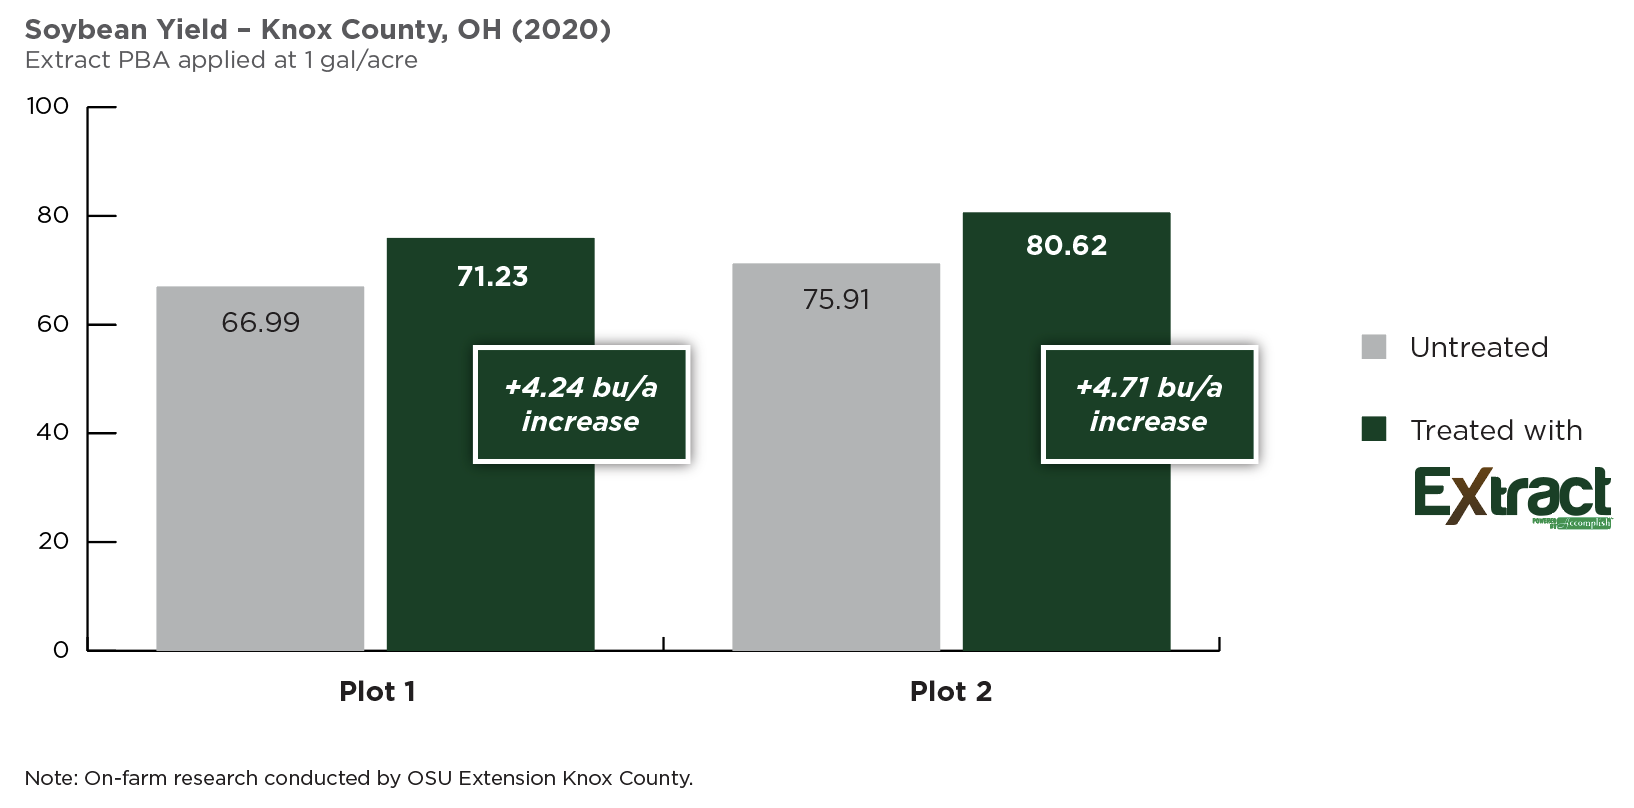 Extract_Soybean Yield_Knox County_OH-2